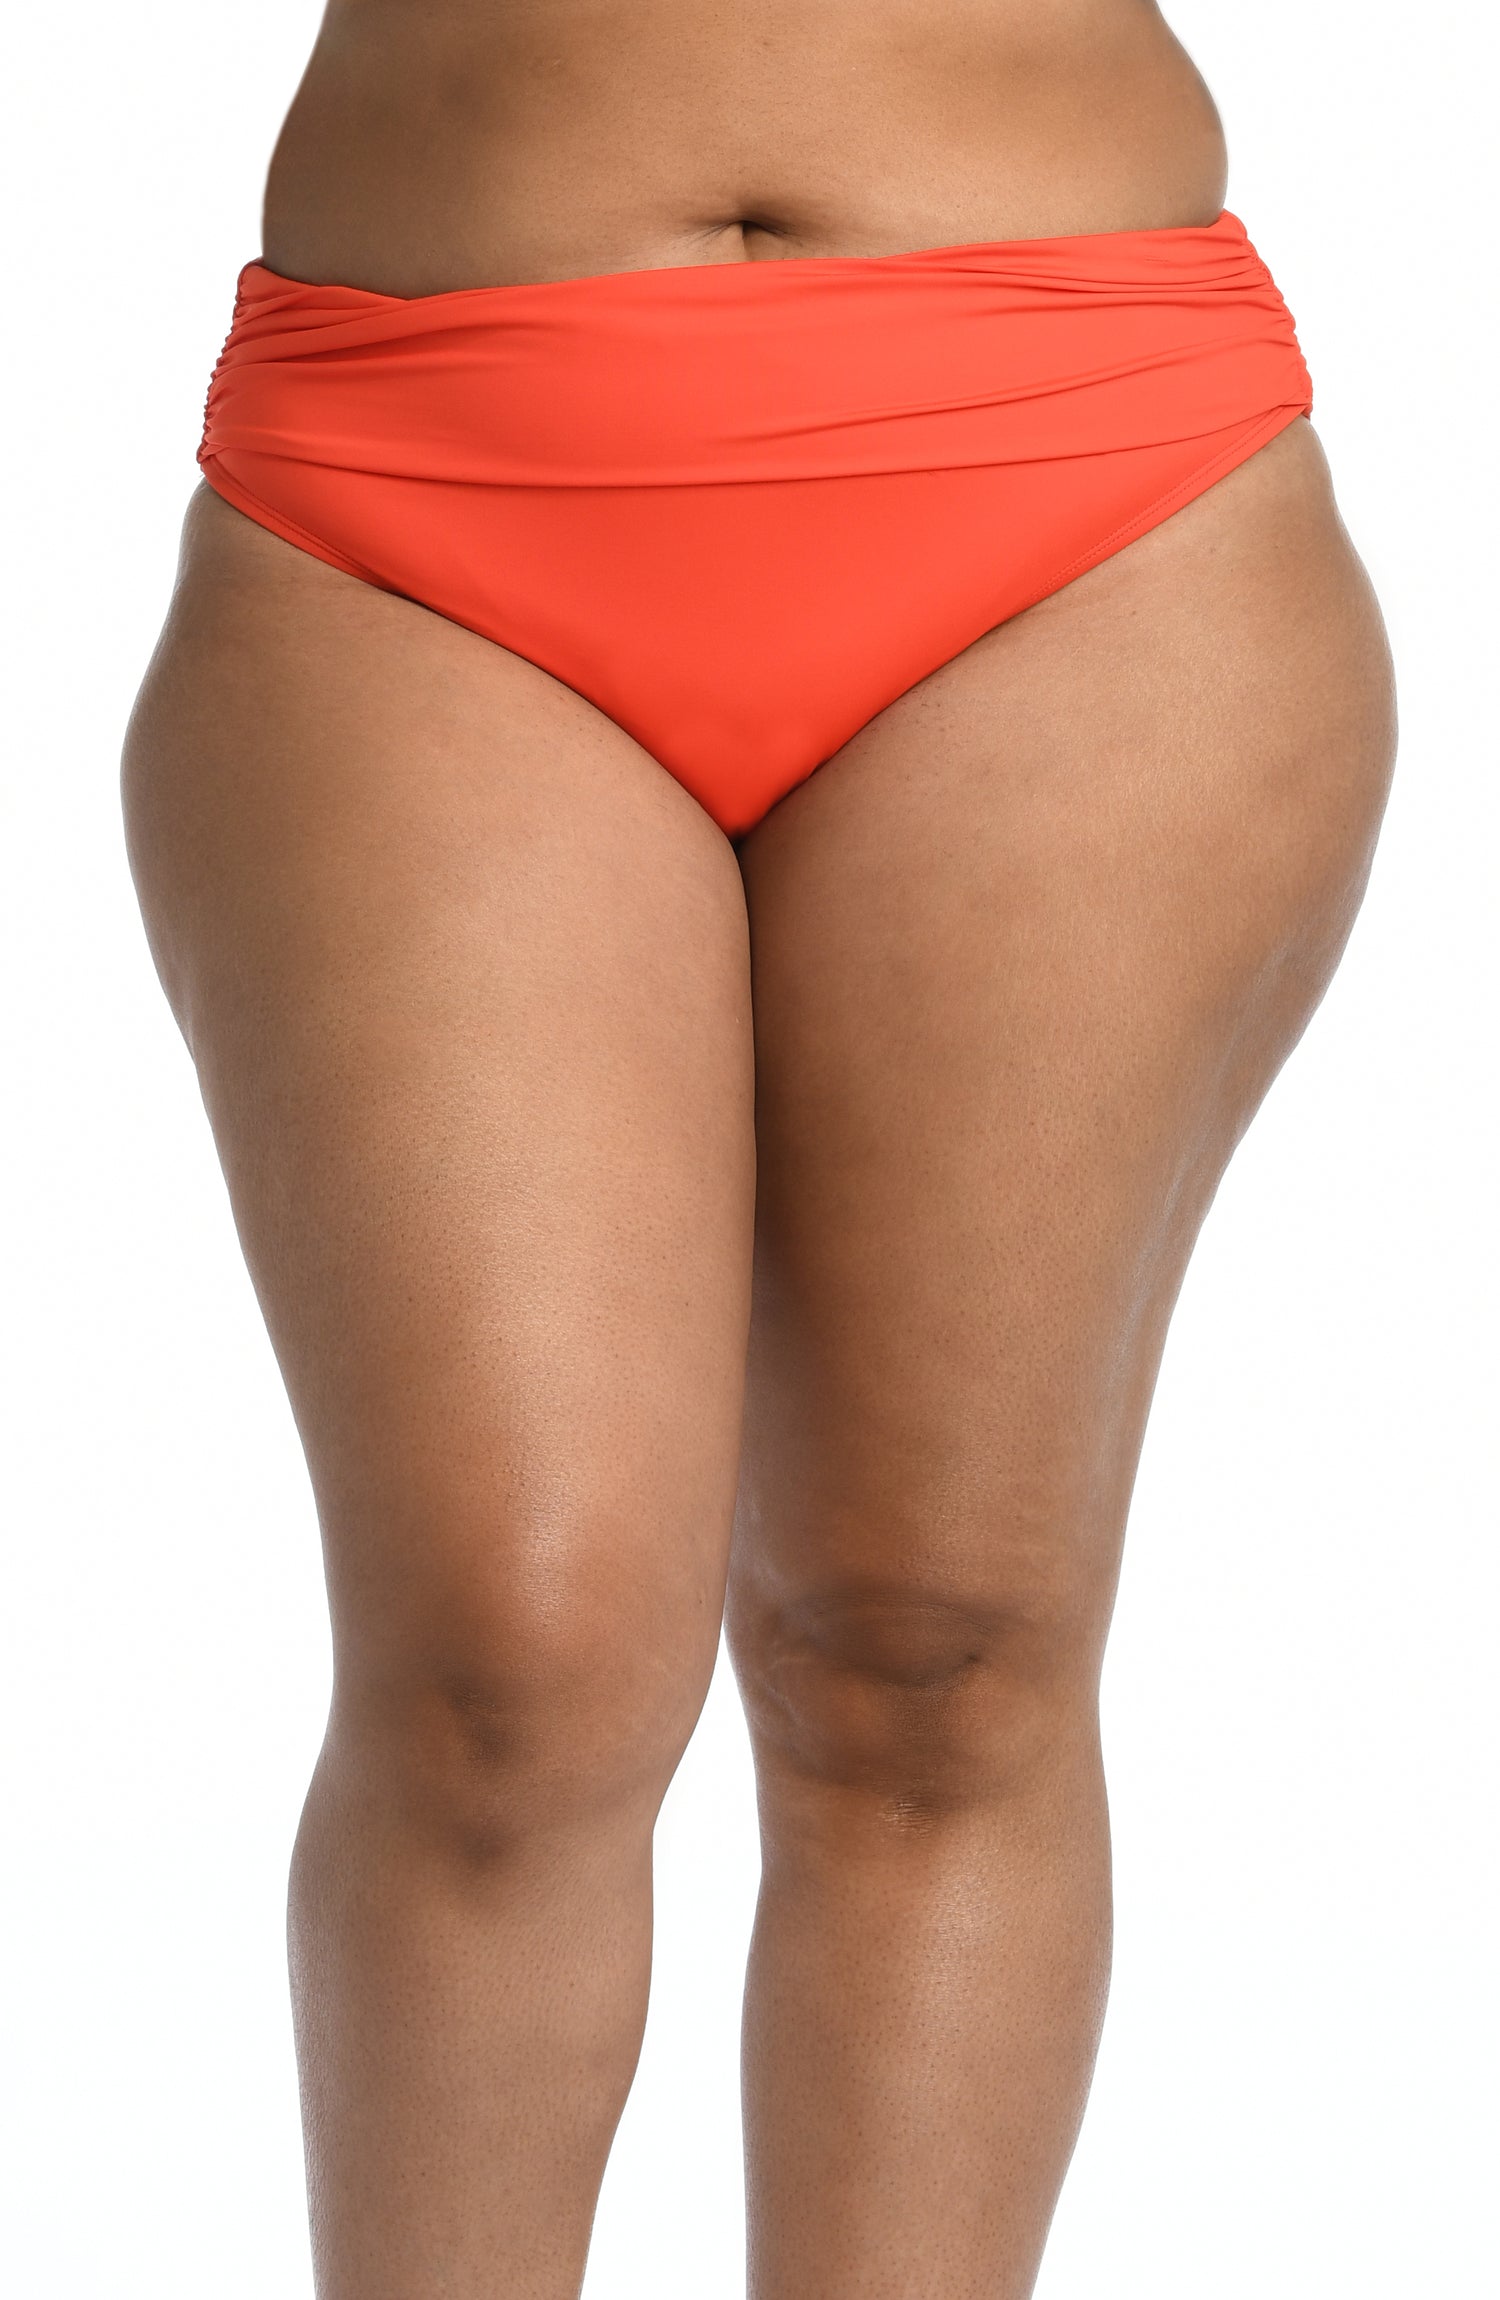 Model is wearing a paprika colored hipster swimsuit bottom from our Best-Selling Island Goddess collection.